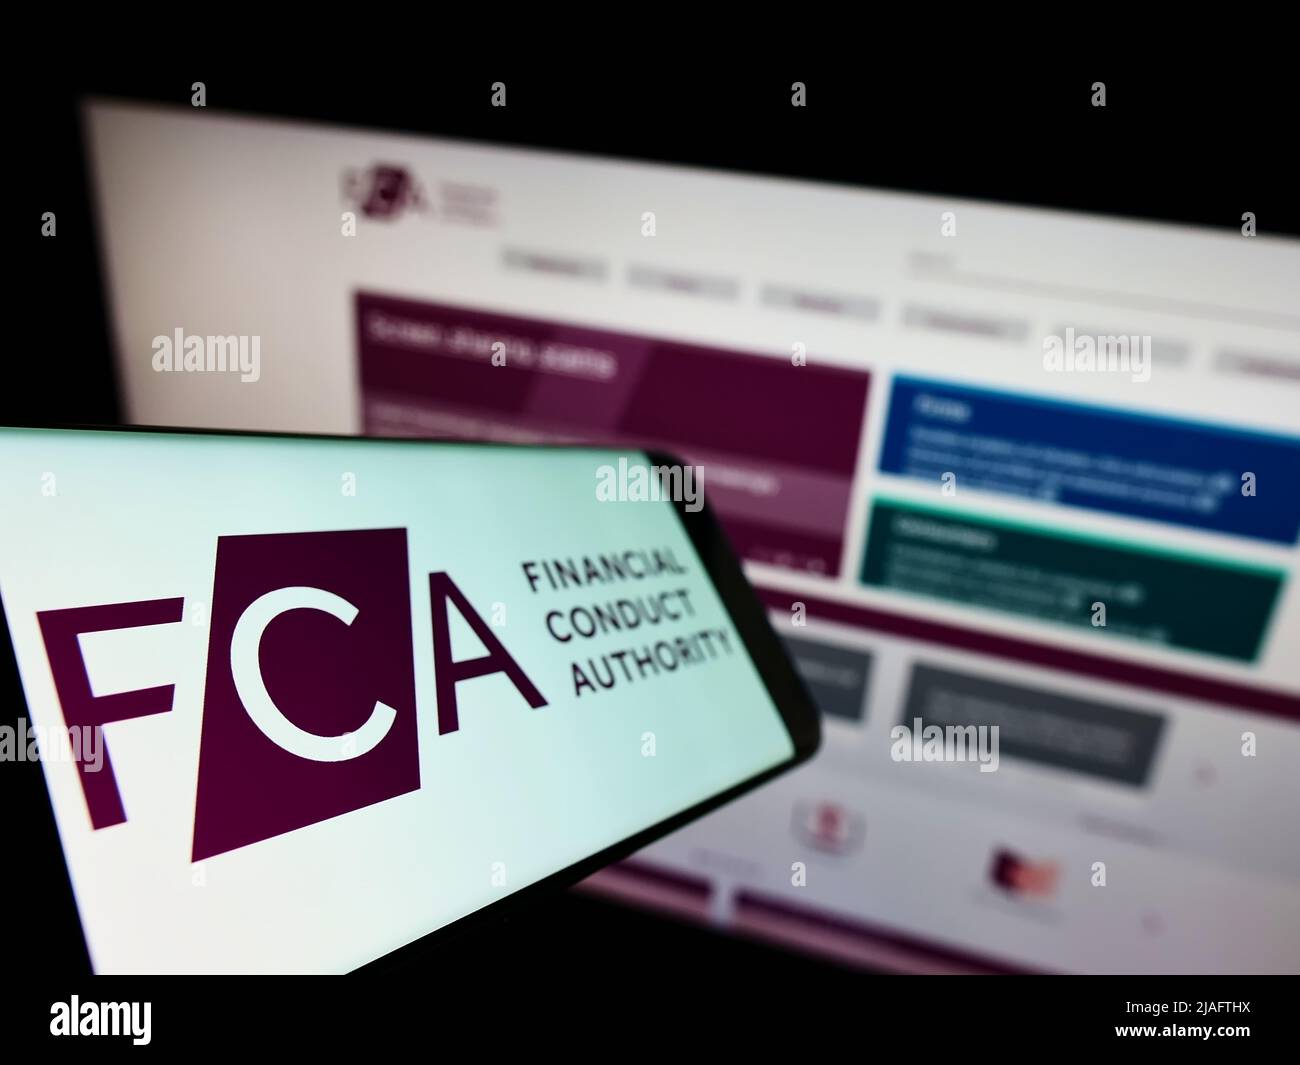 Smartphone with logo of British regulatory body Financial Conduct Authority (FCA) on screen in front of website. Focus on left of phone display. Stock Photo